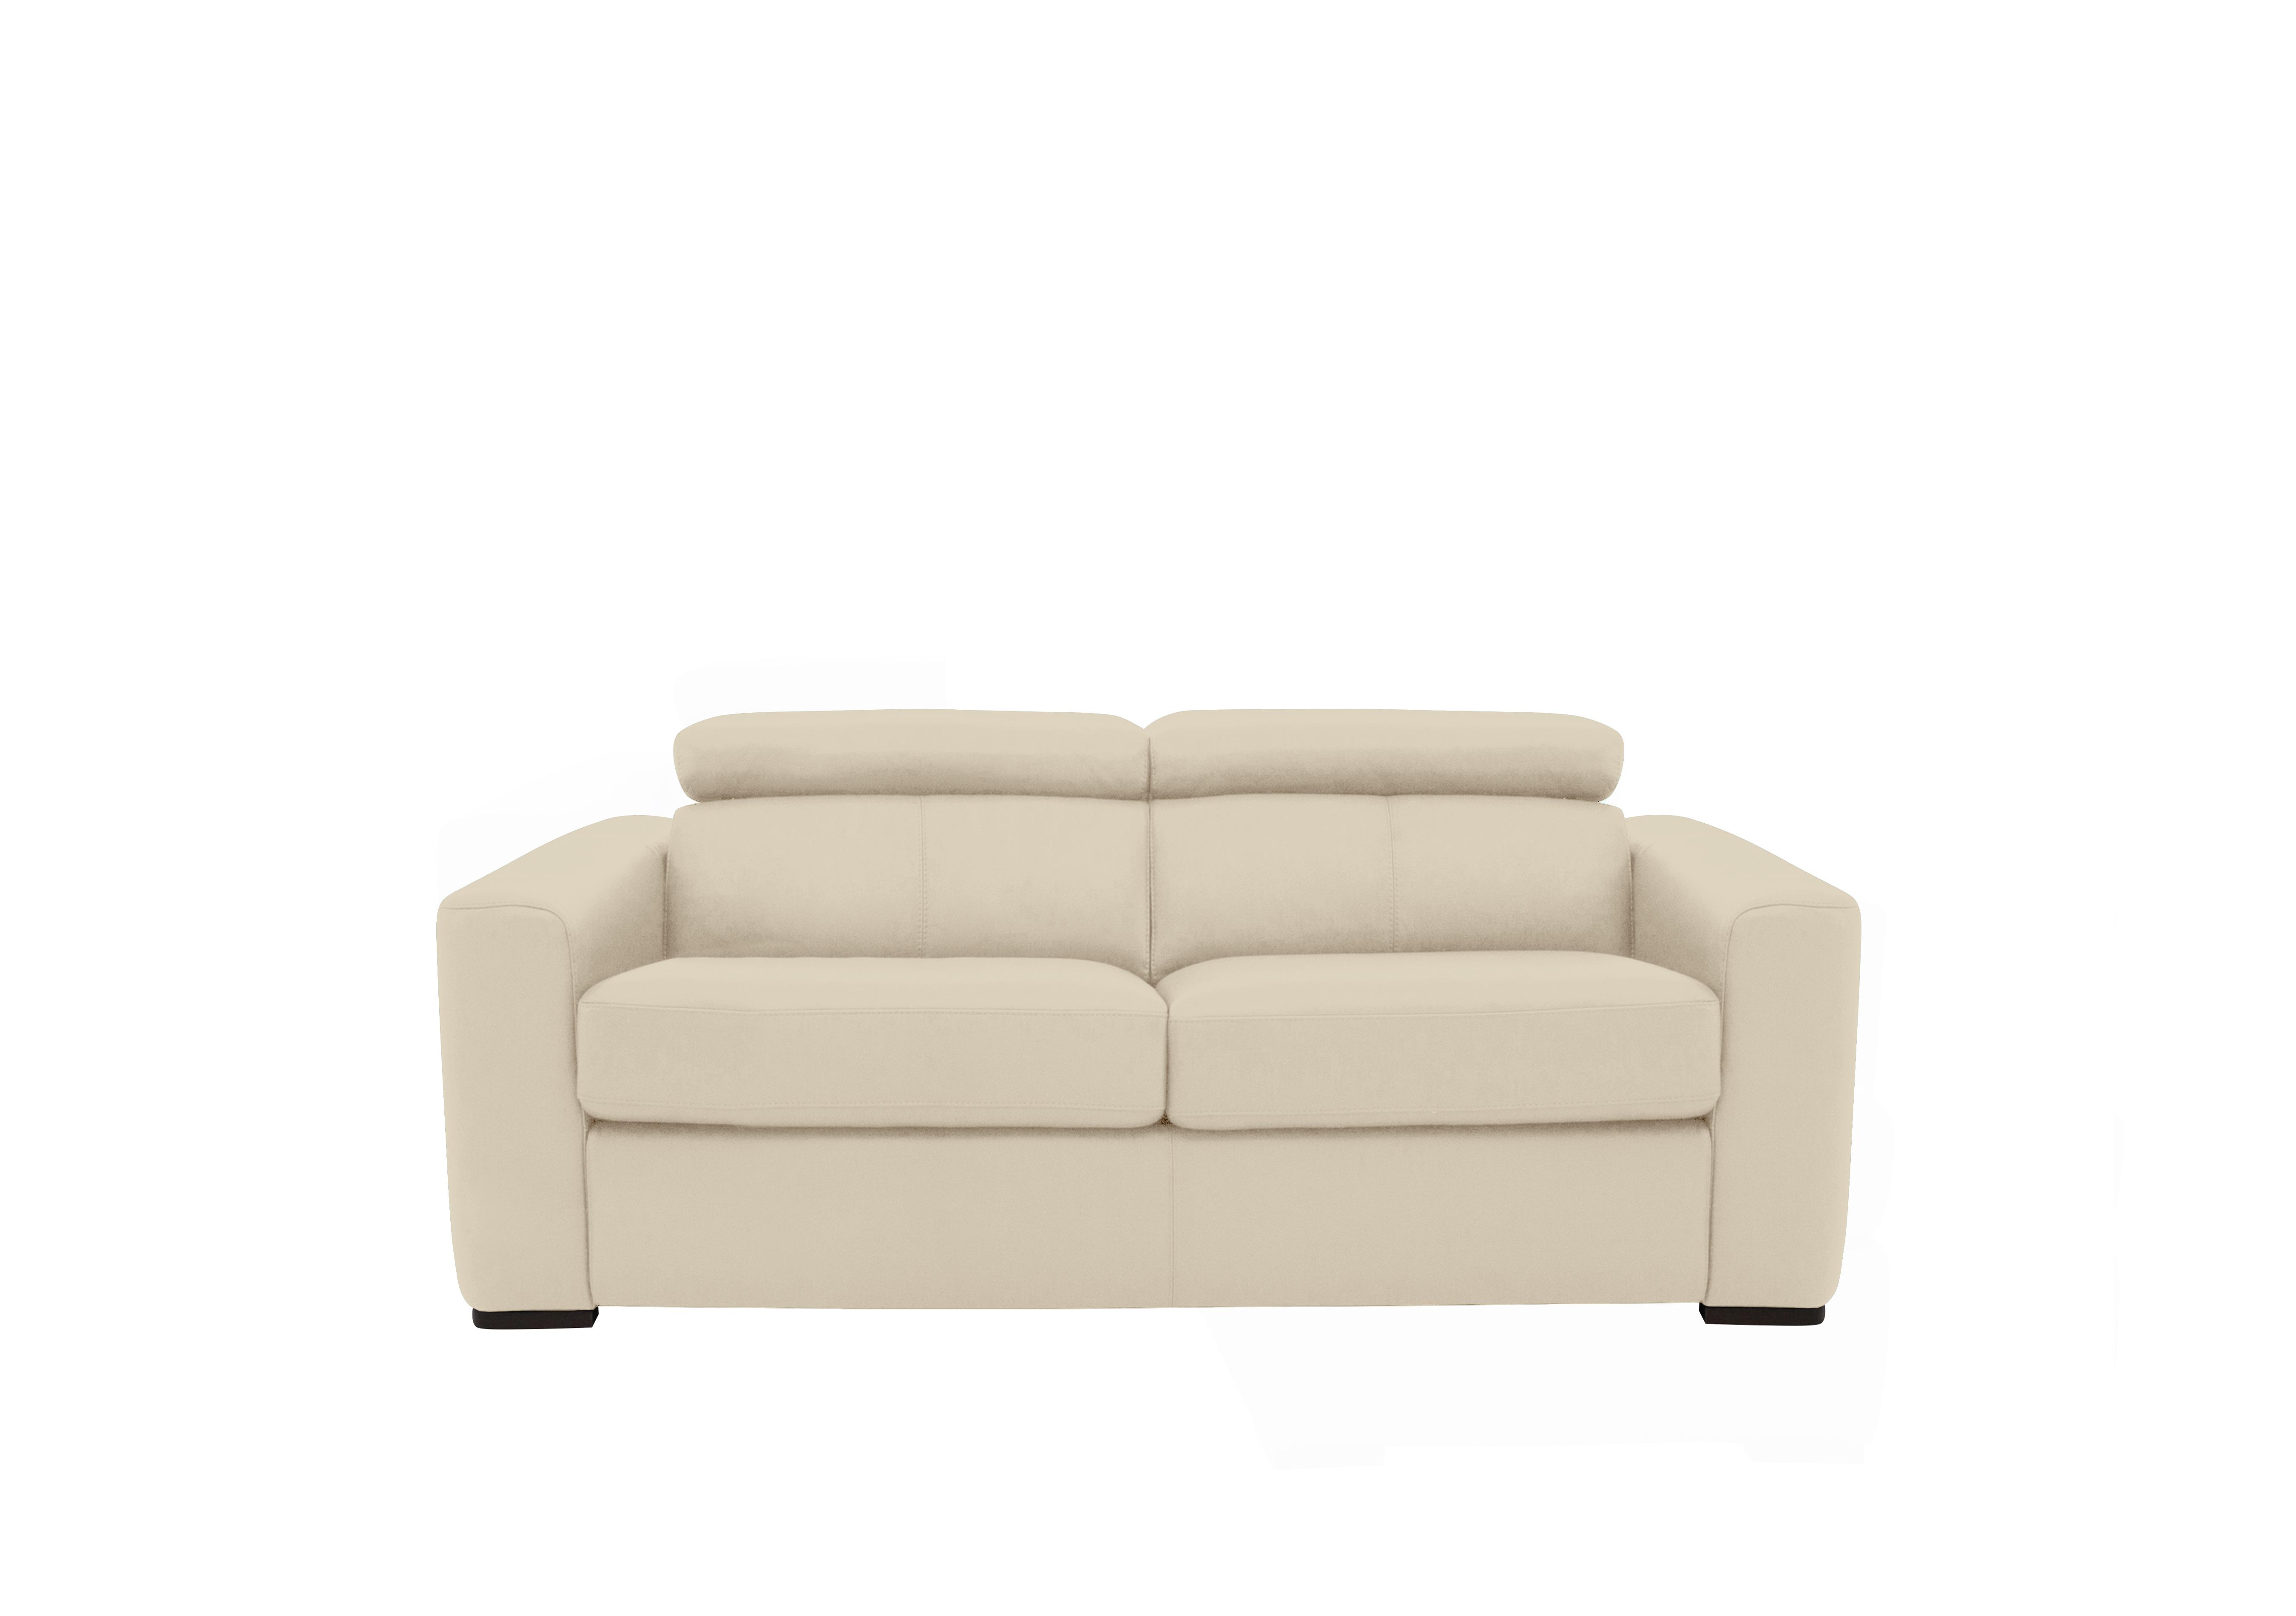 Infinity 2 Seater Leather Sofa in Bv-862c Bisque on Furniture Village